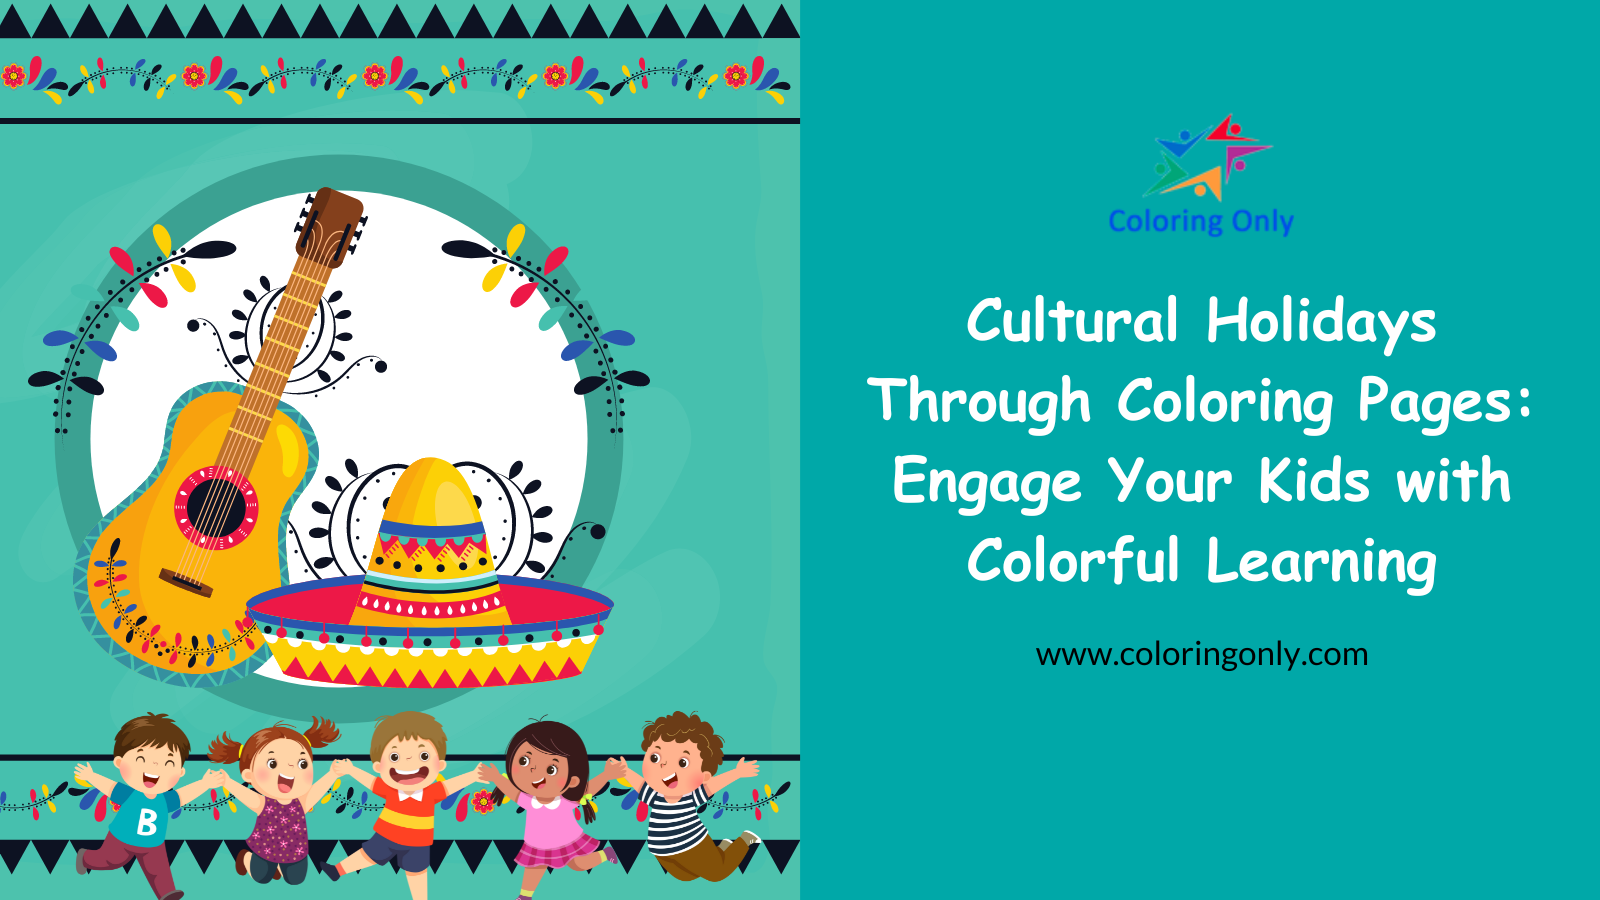 Cultural Holidays Through Coloring Pages: Engage Your Kids with Colorful Learning